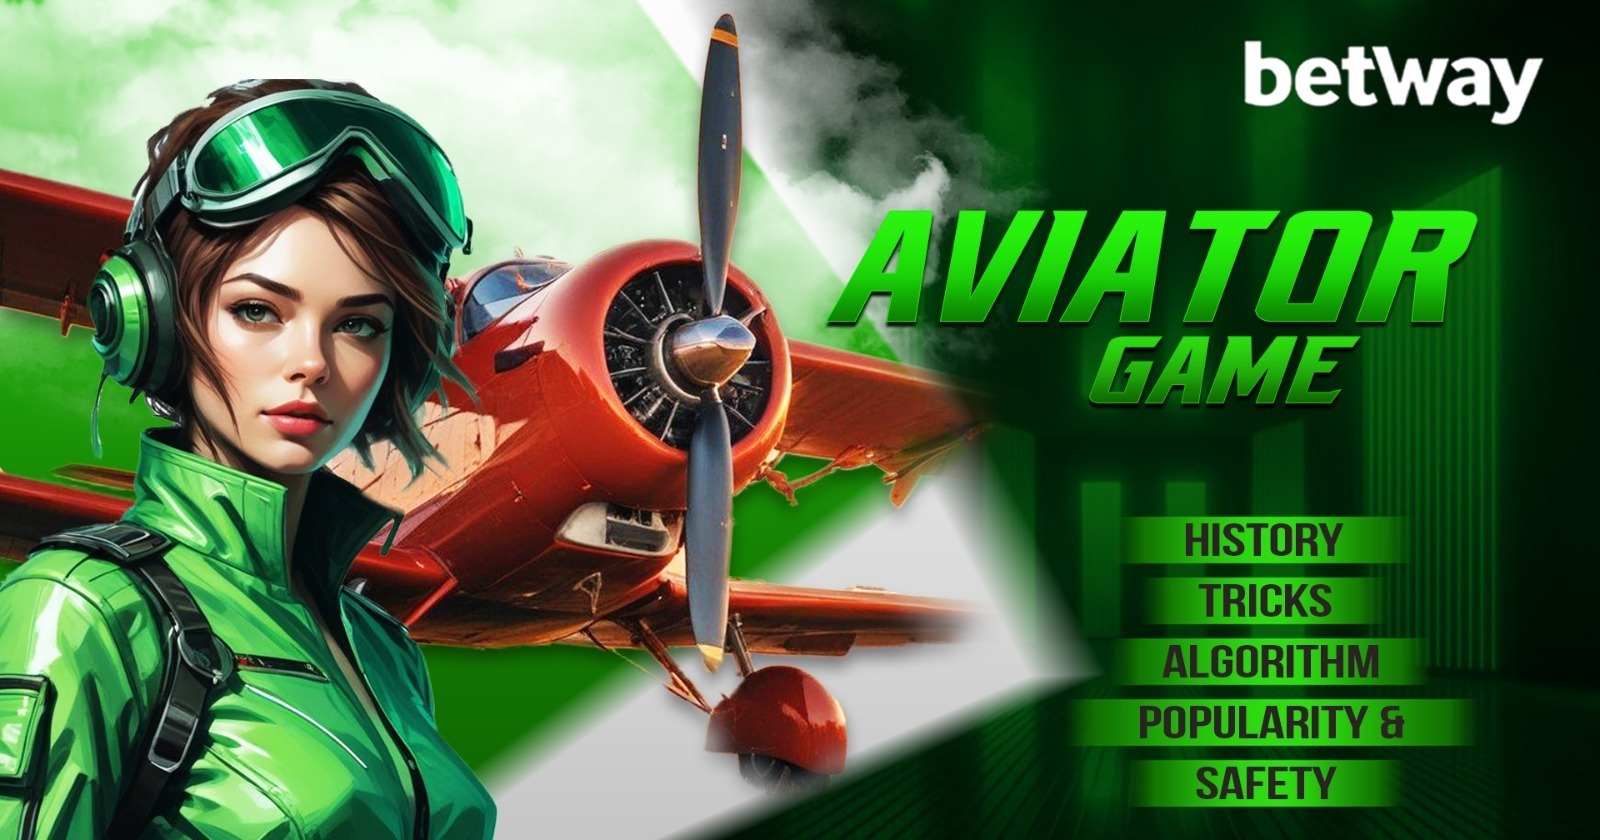 Aviator Game: History, Tricks, Algorithm, Popularity, and Safety – Telegraph